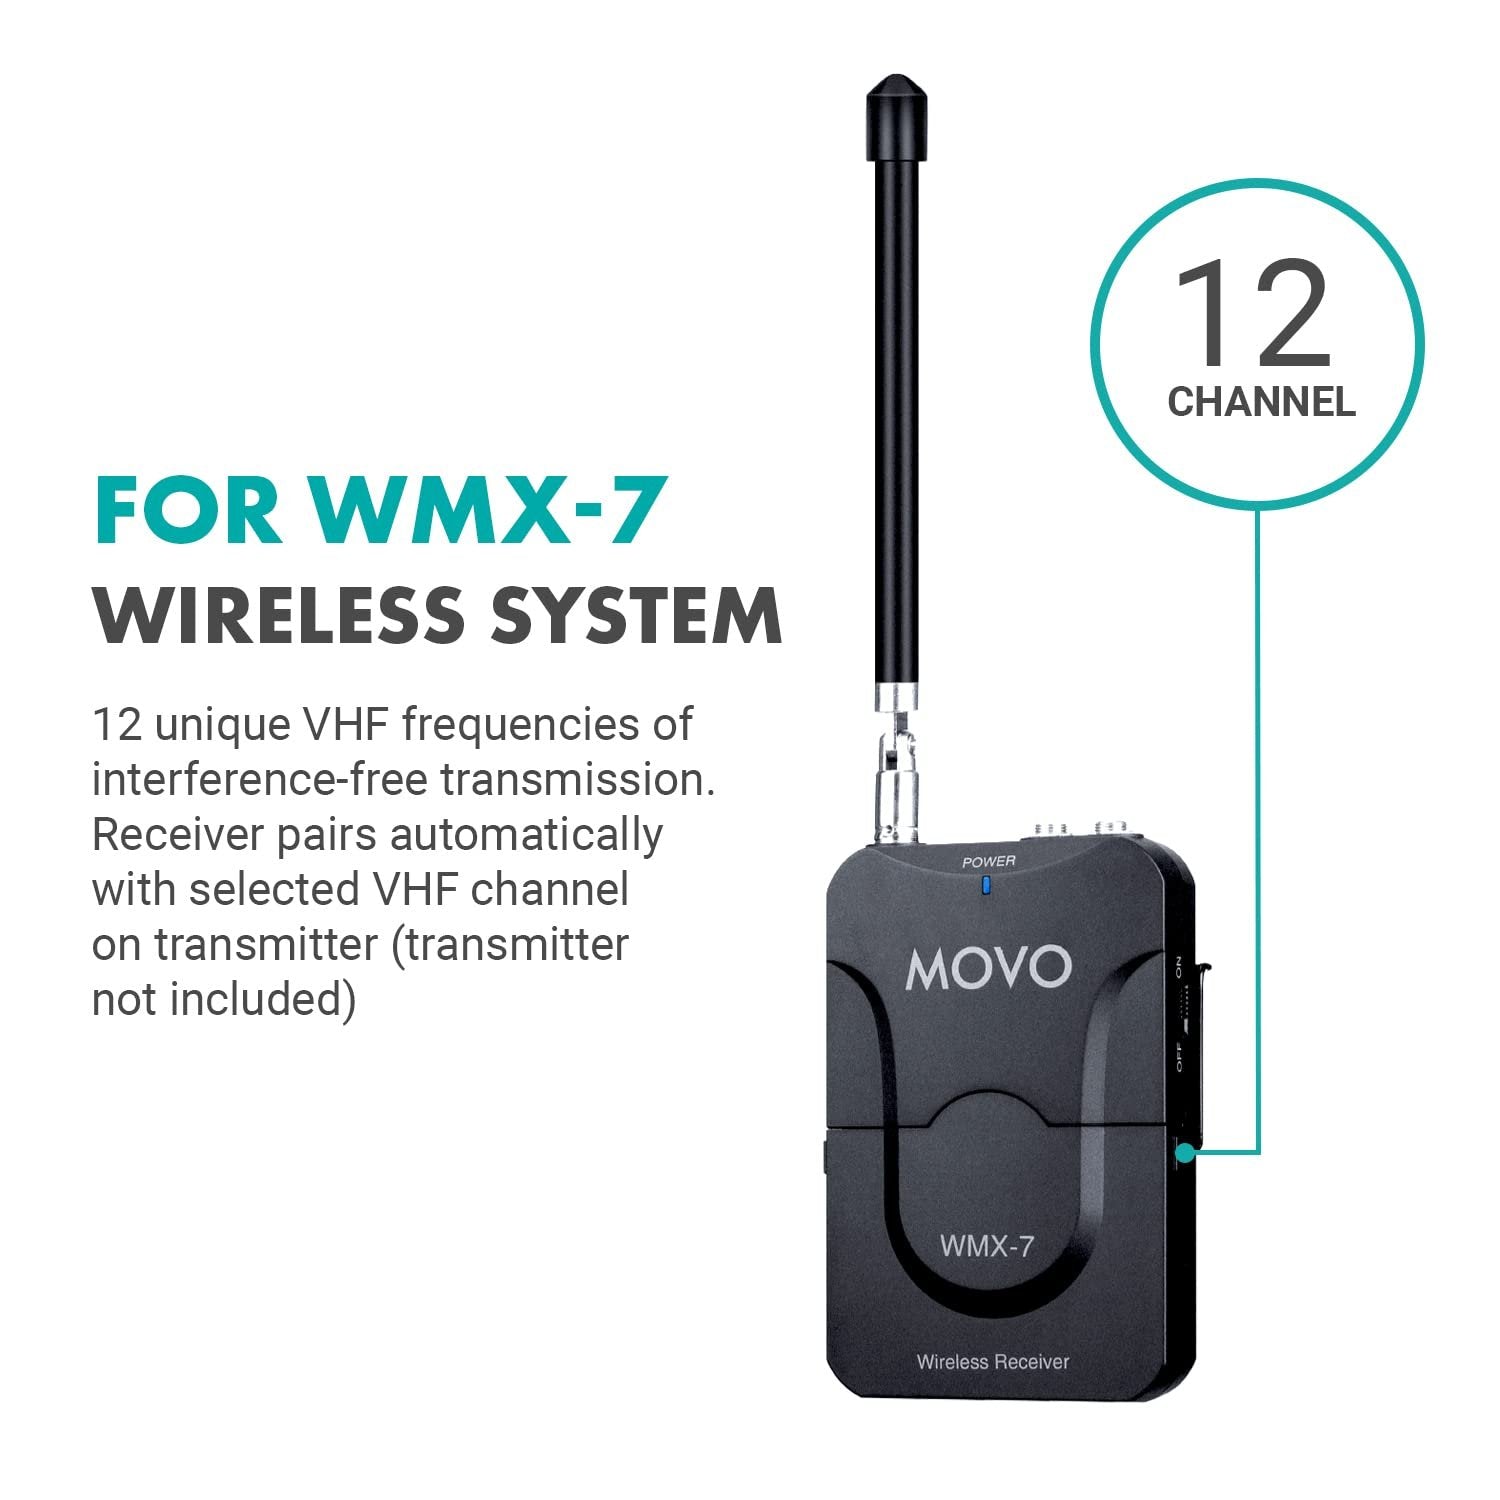 Movo WMX-7 RX Wireless Receiver Only for Microphone System - Bodypack Receiver for Events and Recording